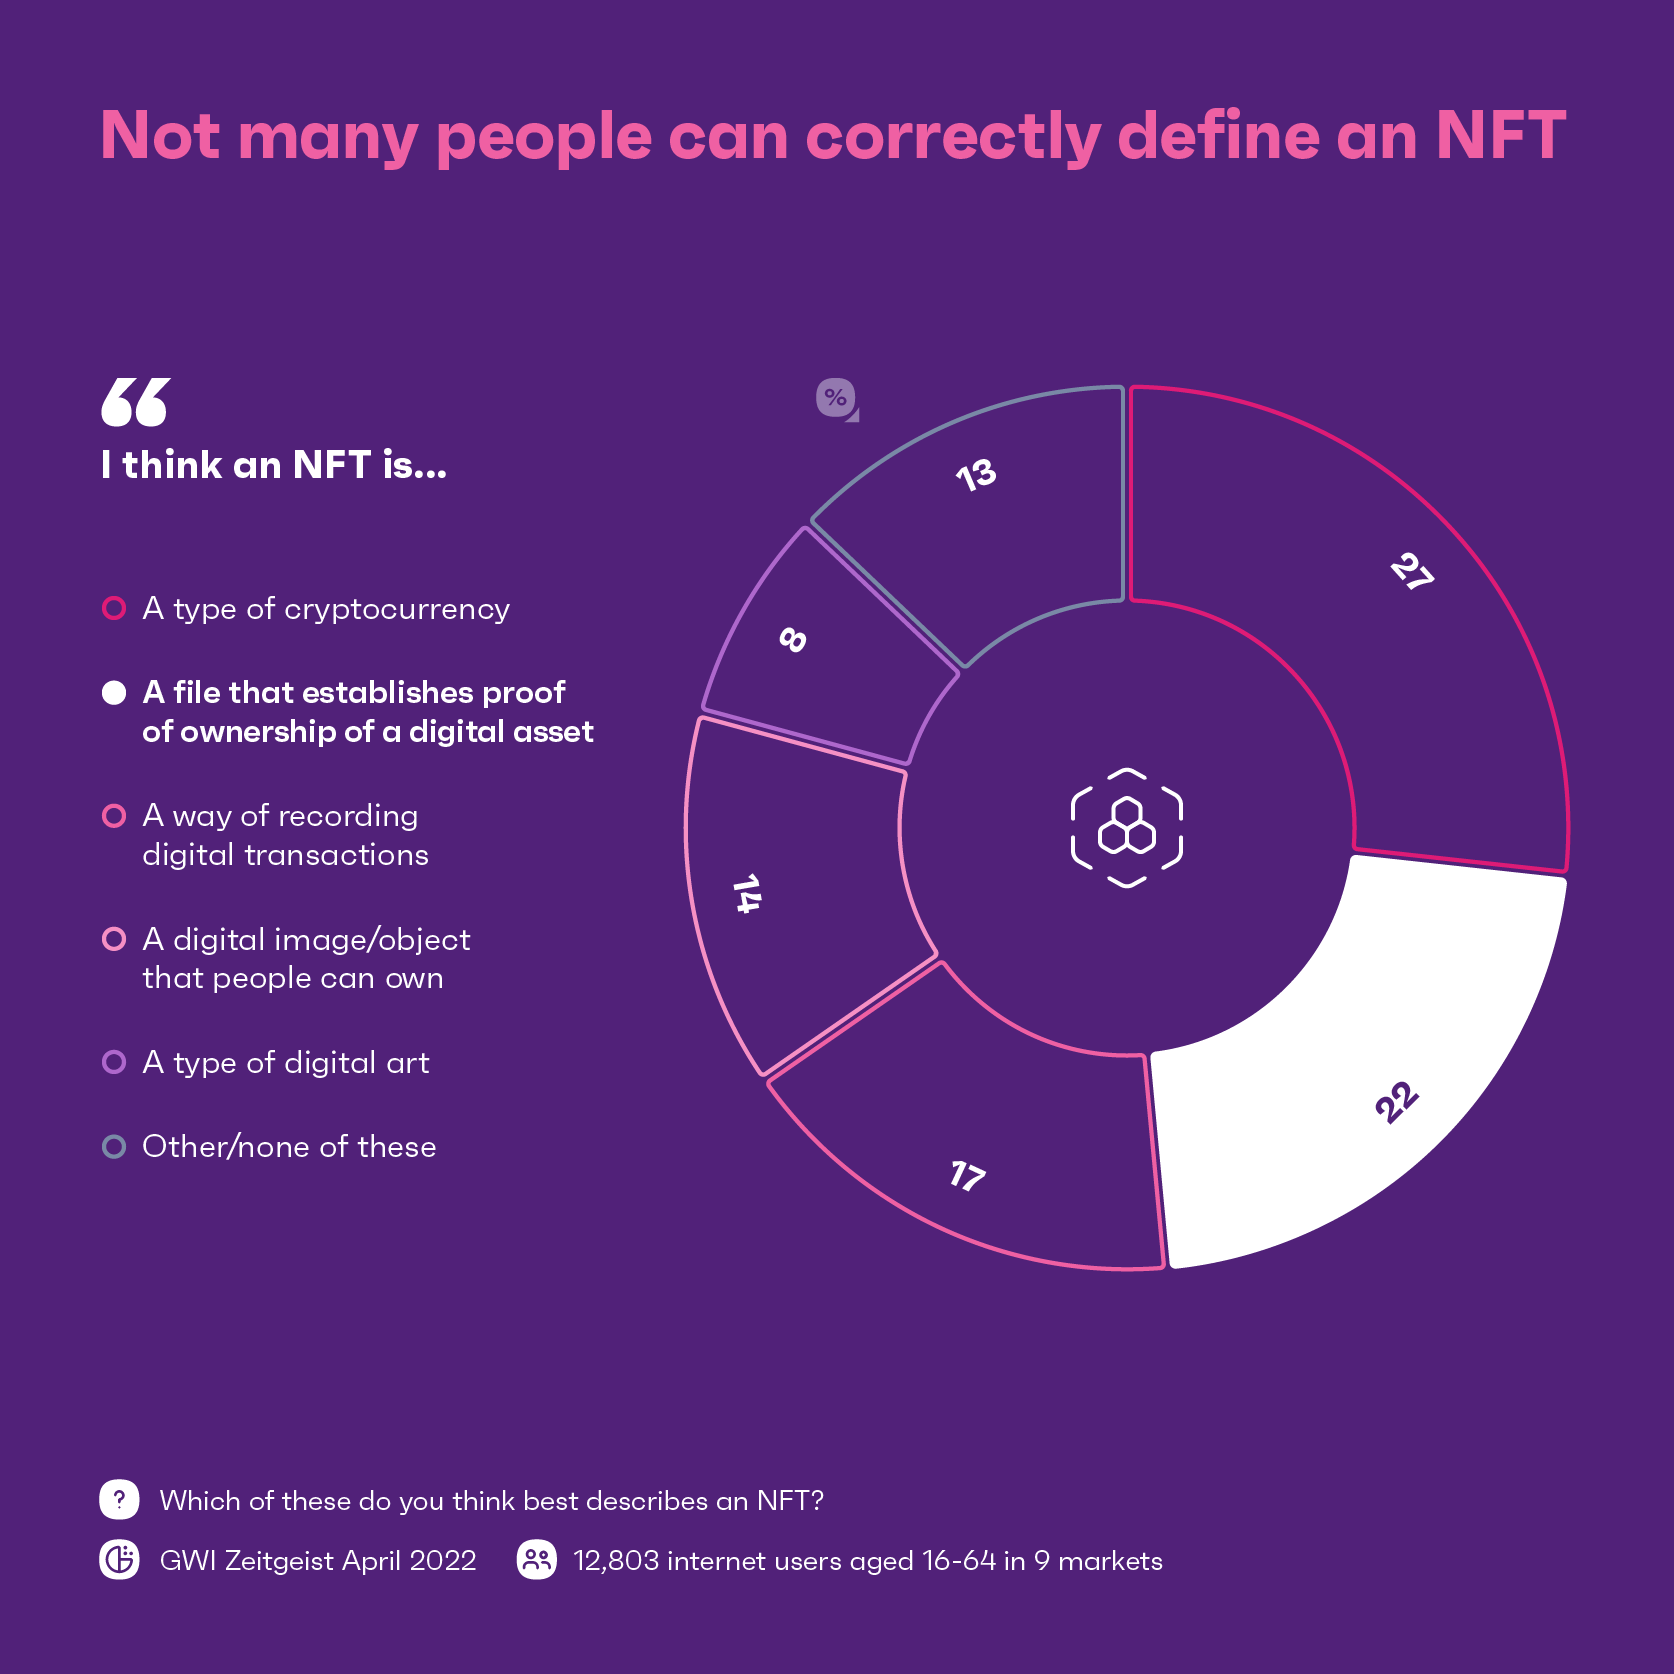 Not many people can correctly define an NFT